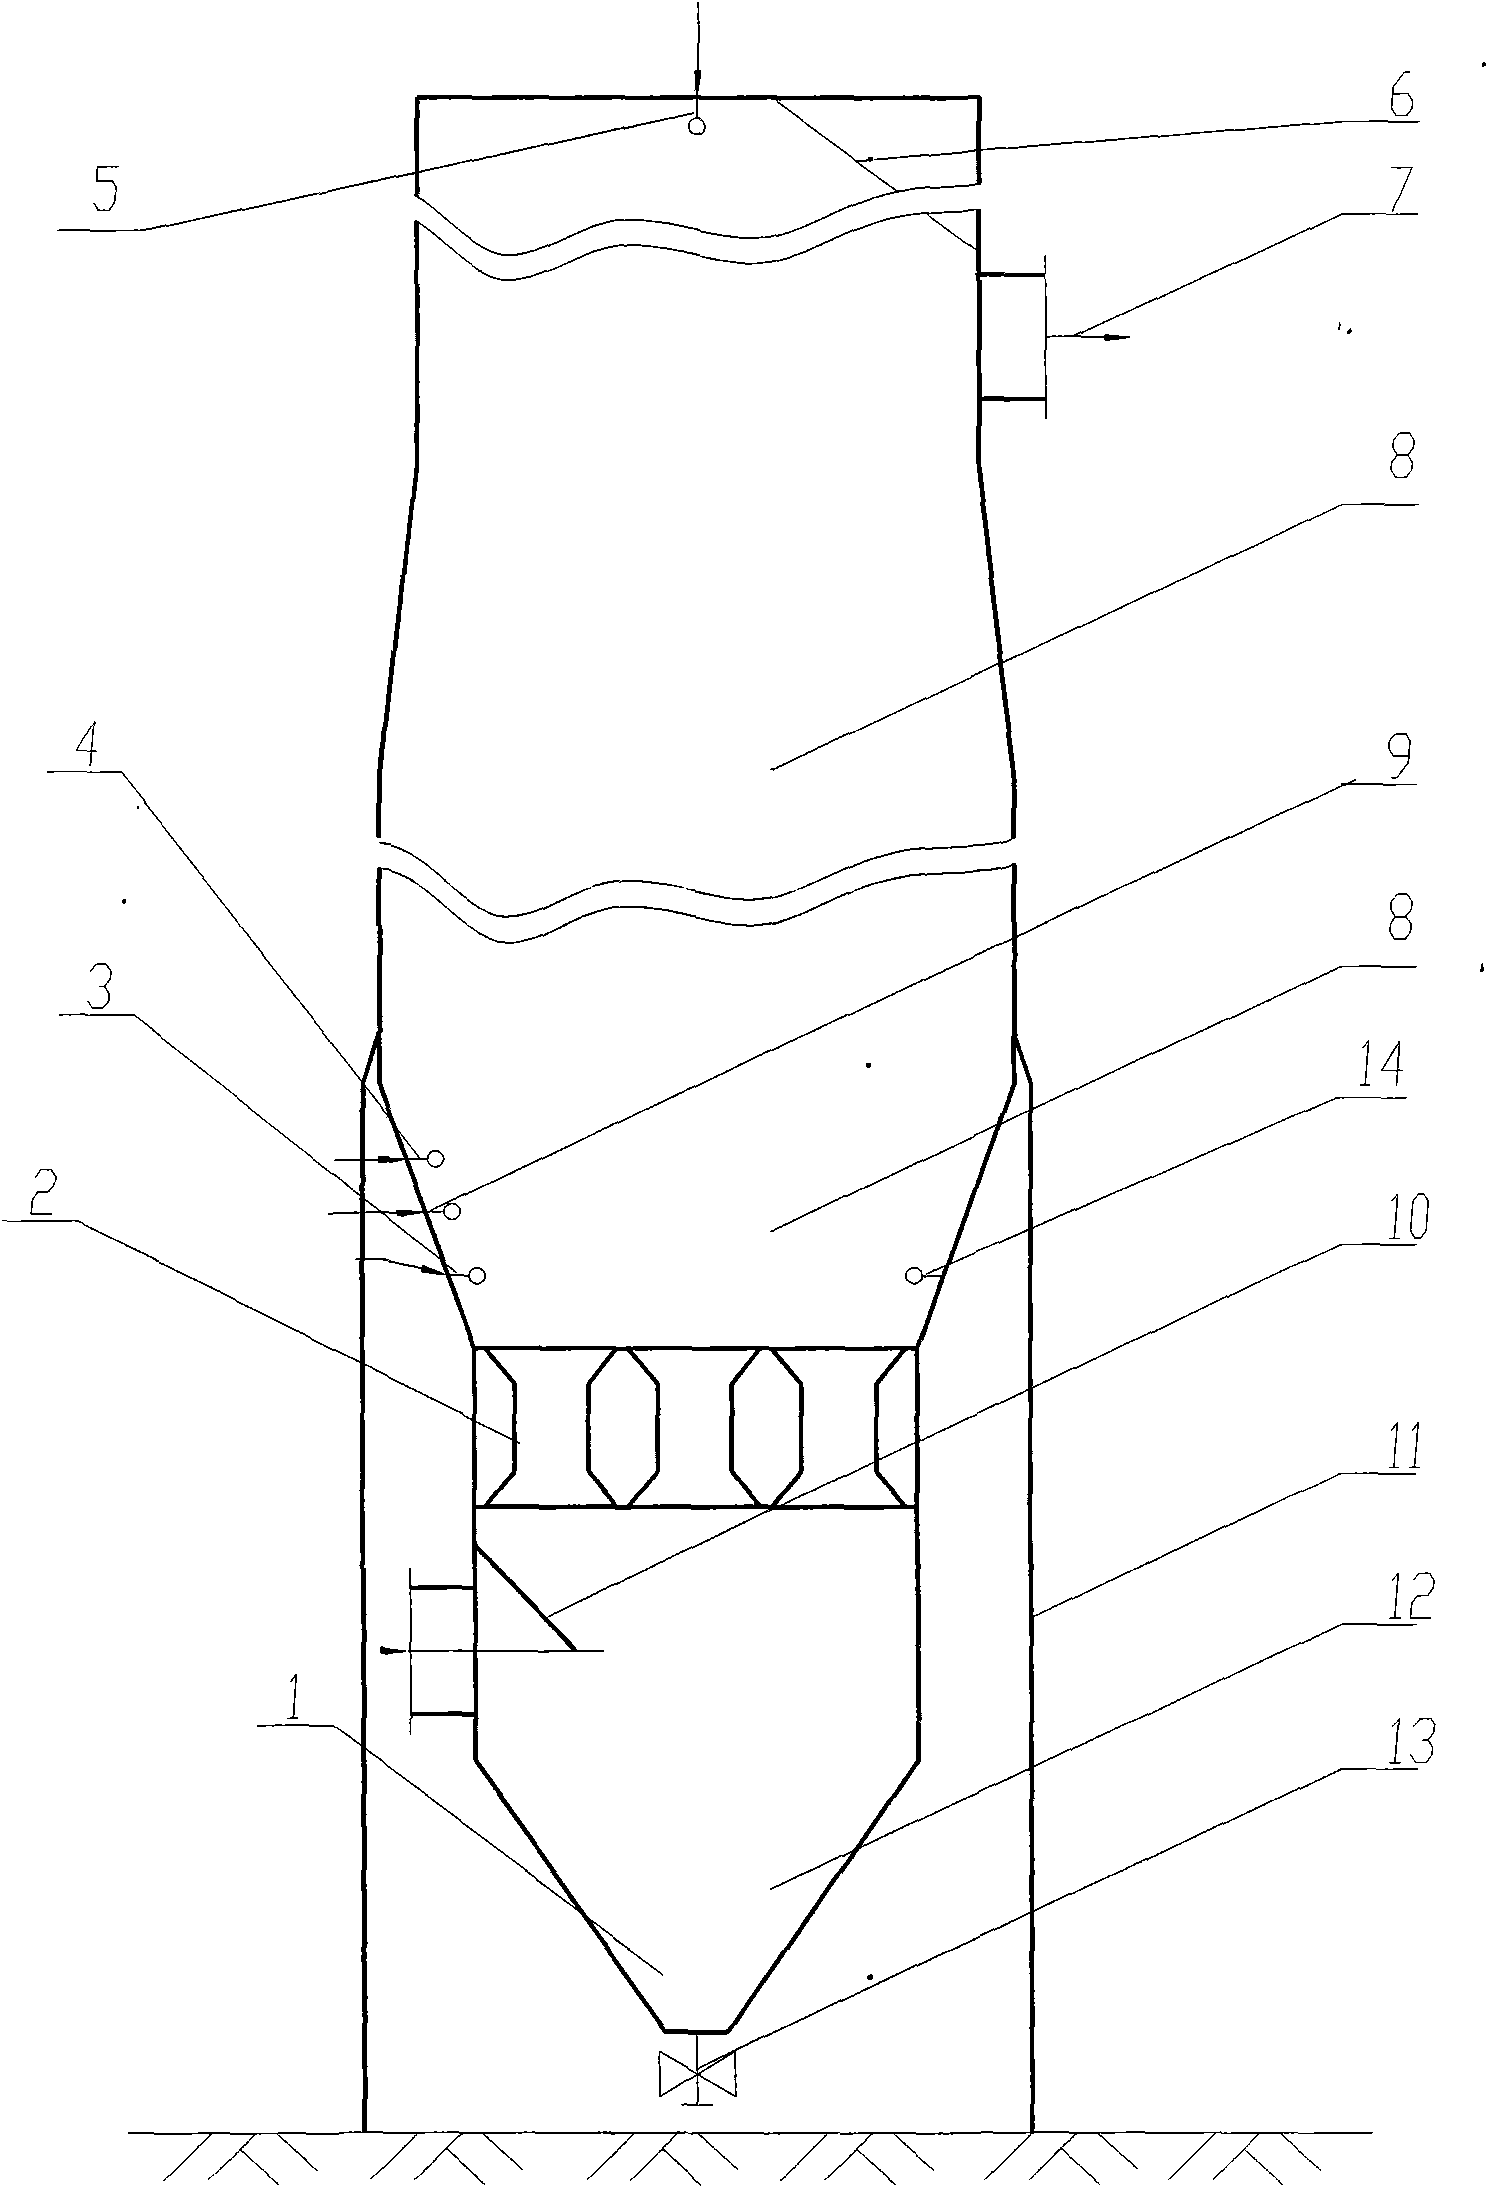 Digestive circulating fluid bed flue gas desulfurization method and device